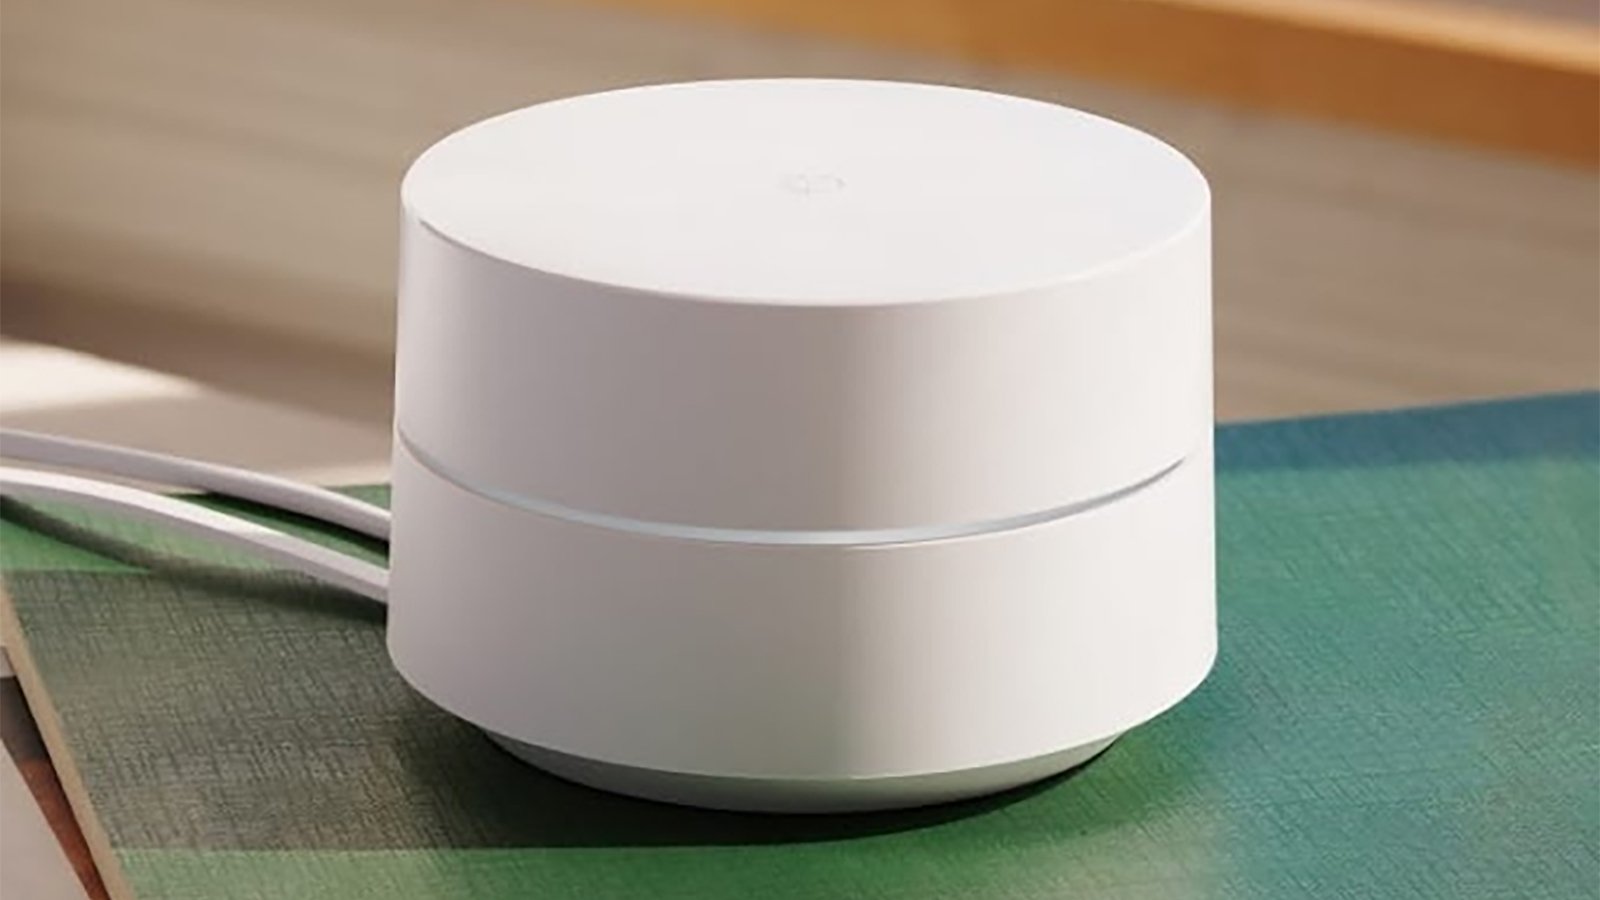 A Google Wifi device on a coffee table